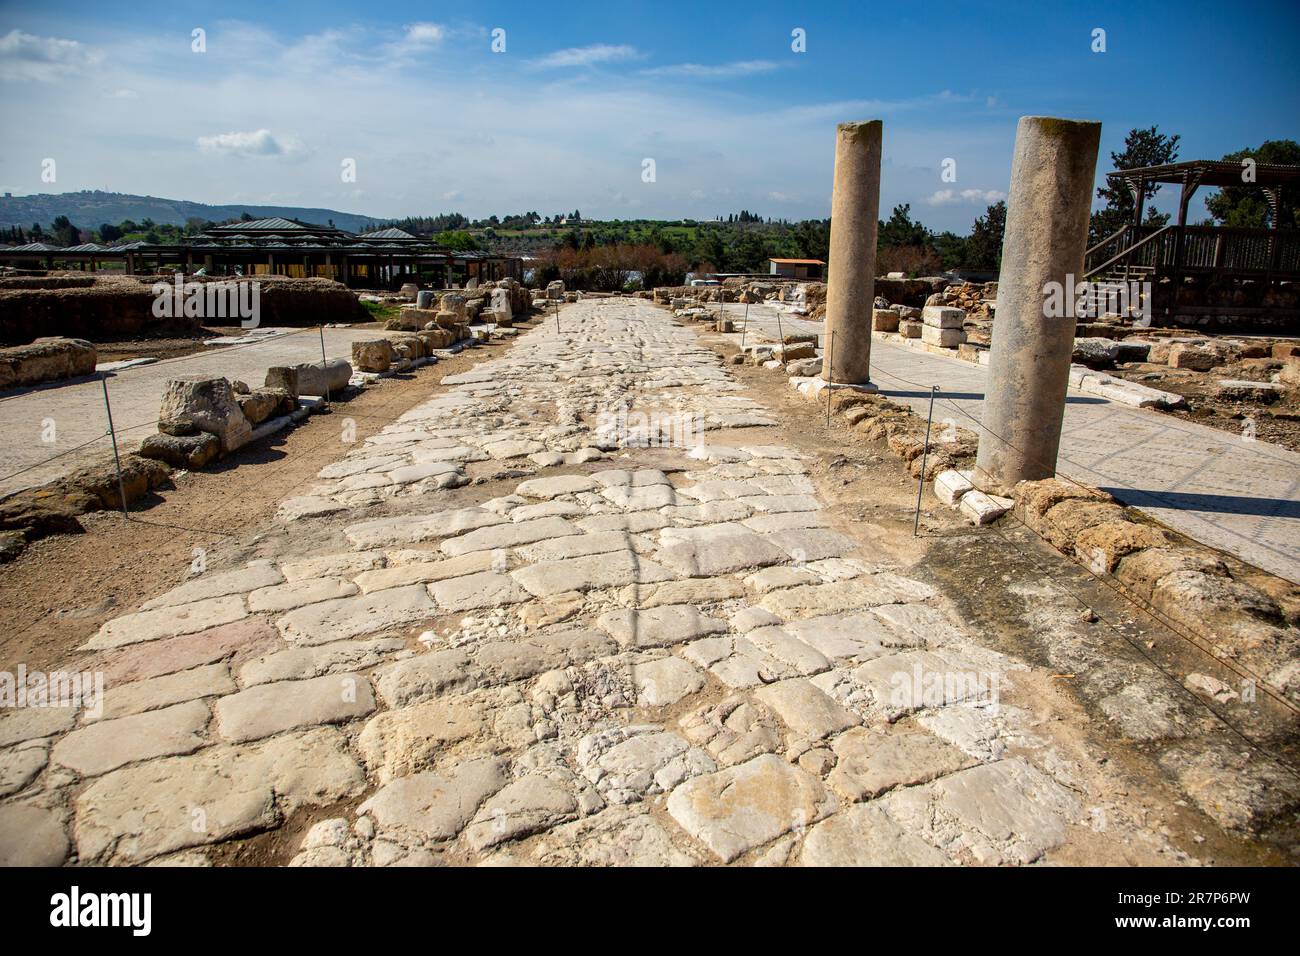 Sepphoris is a former village and an archaeological site located in the central Galilee region of Israel, 6 kilometres north-northwest of Nazareth and overlooking the Beit Netofa Valley. The site holds a rich and diverse historical and architectural legacy that includes Hellenistic, ancient Jewish, Roman, Byzantine, Islamic, Crusader, Arab and Ottoman remains. Stock Photo